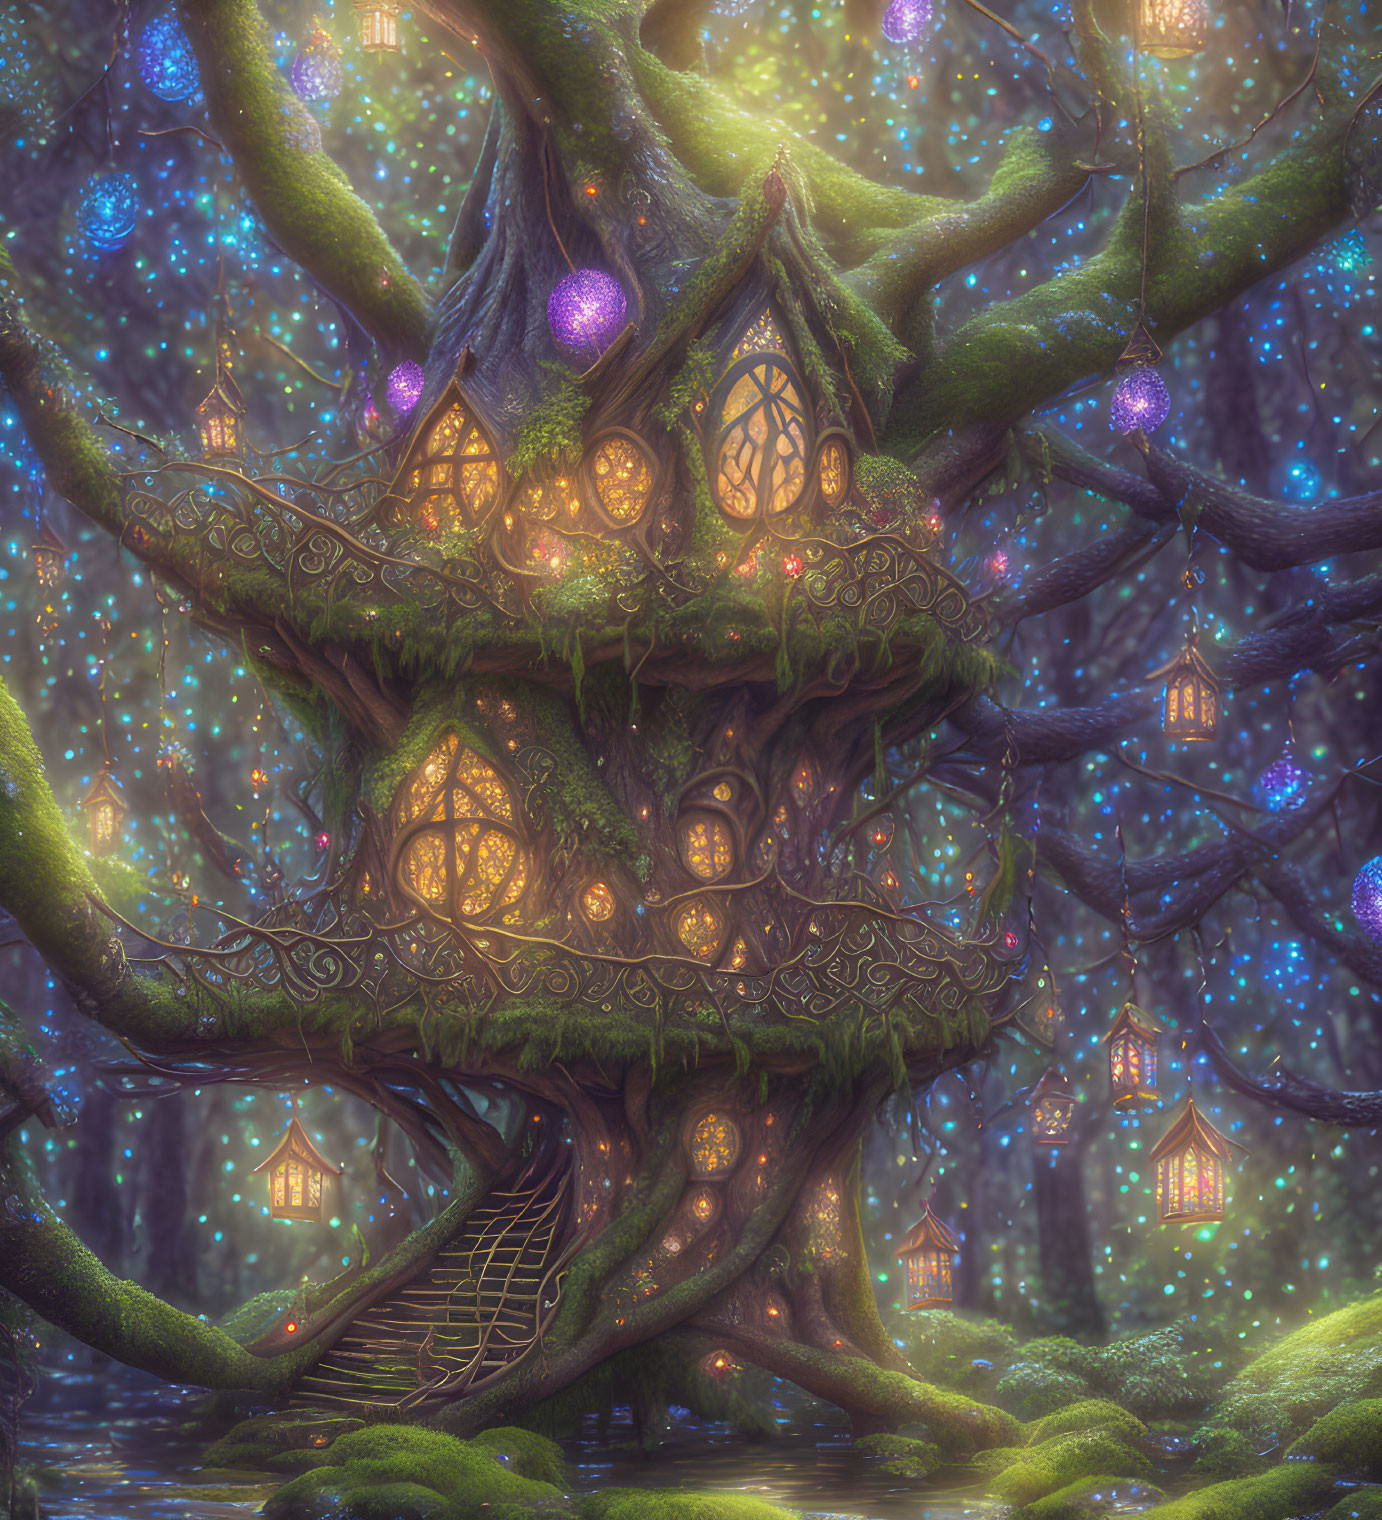 Enchanting treehouse illuminated by orbs in magical forest